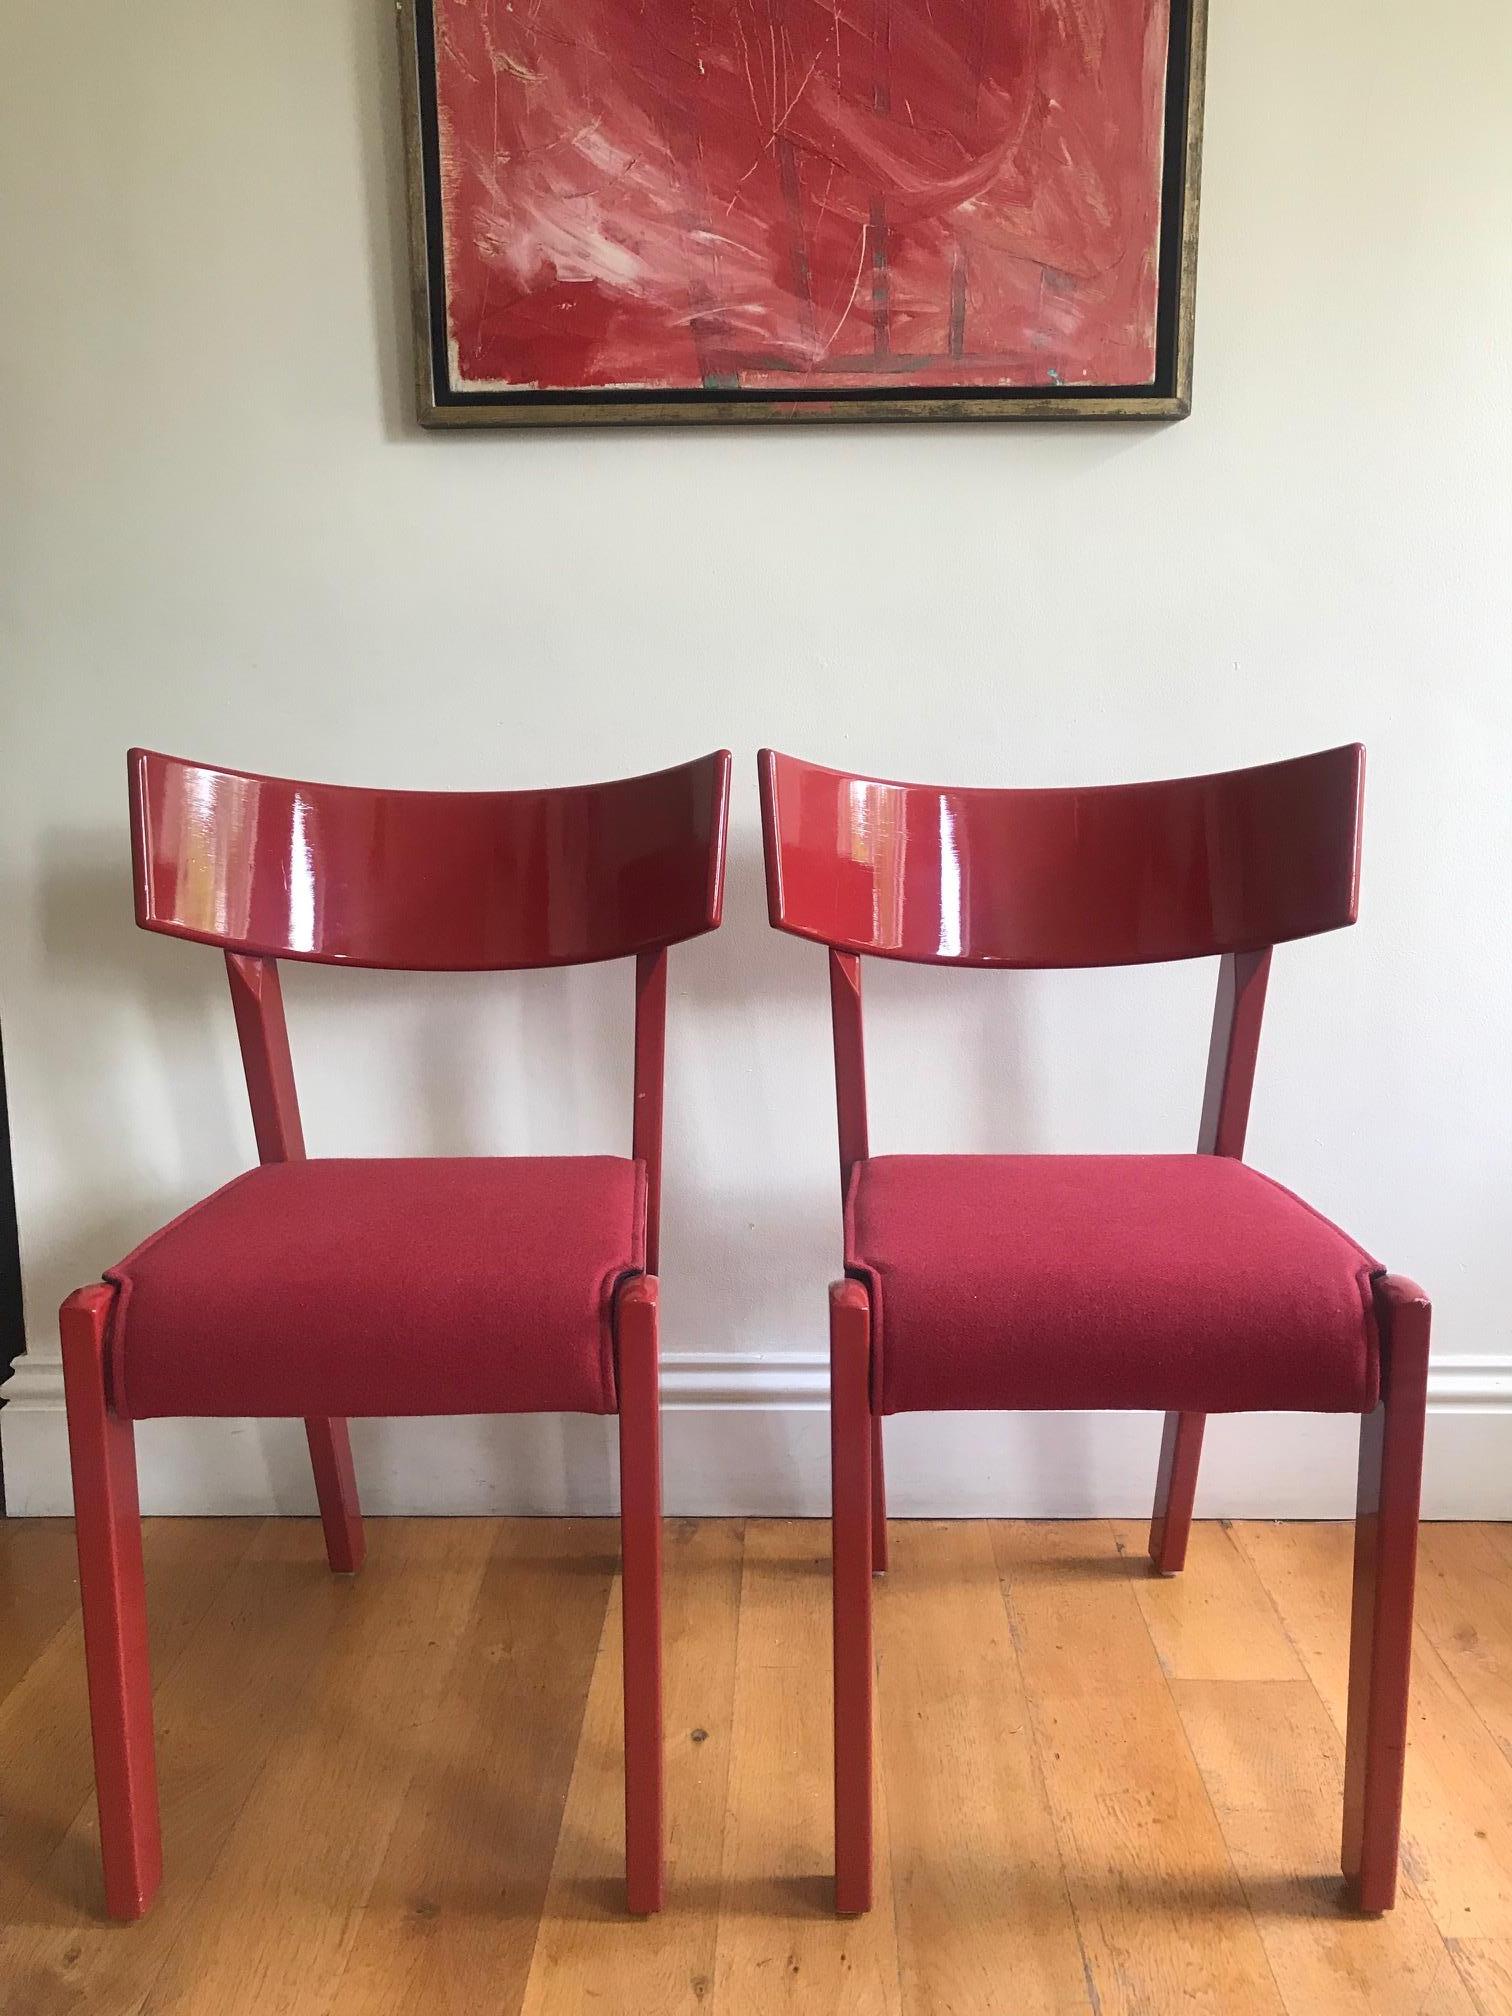 Pair of stunning red lacquered chairs 